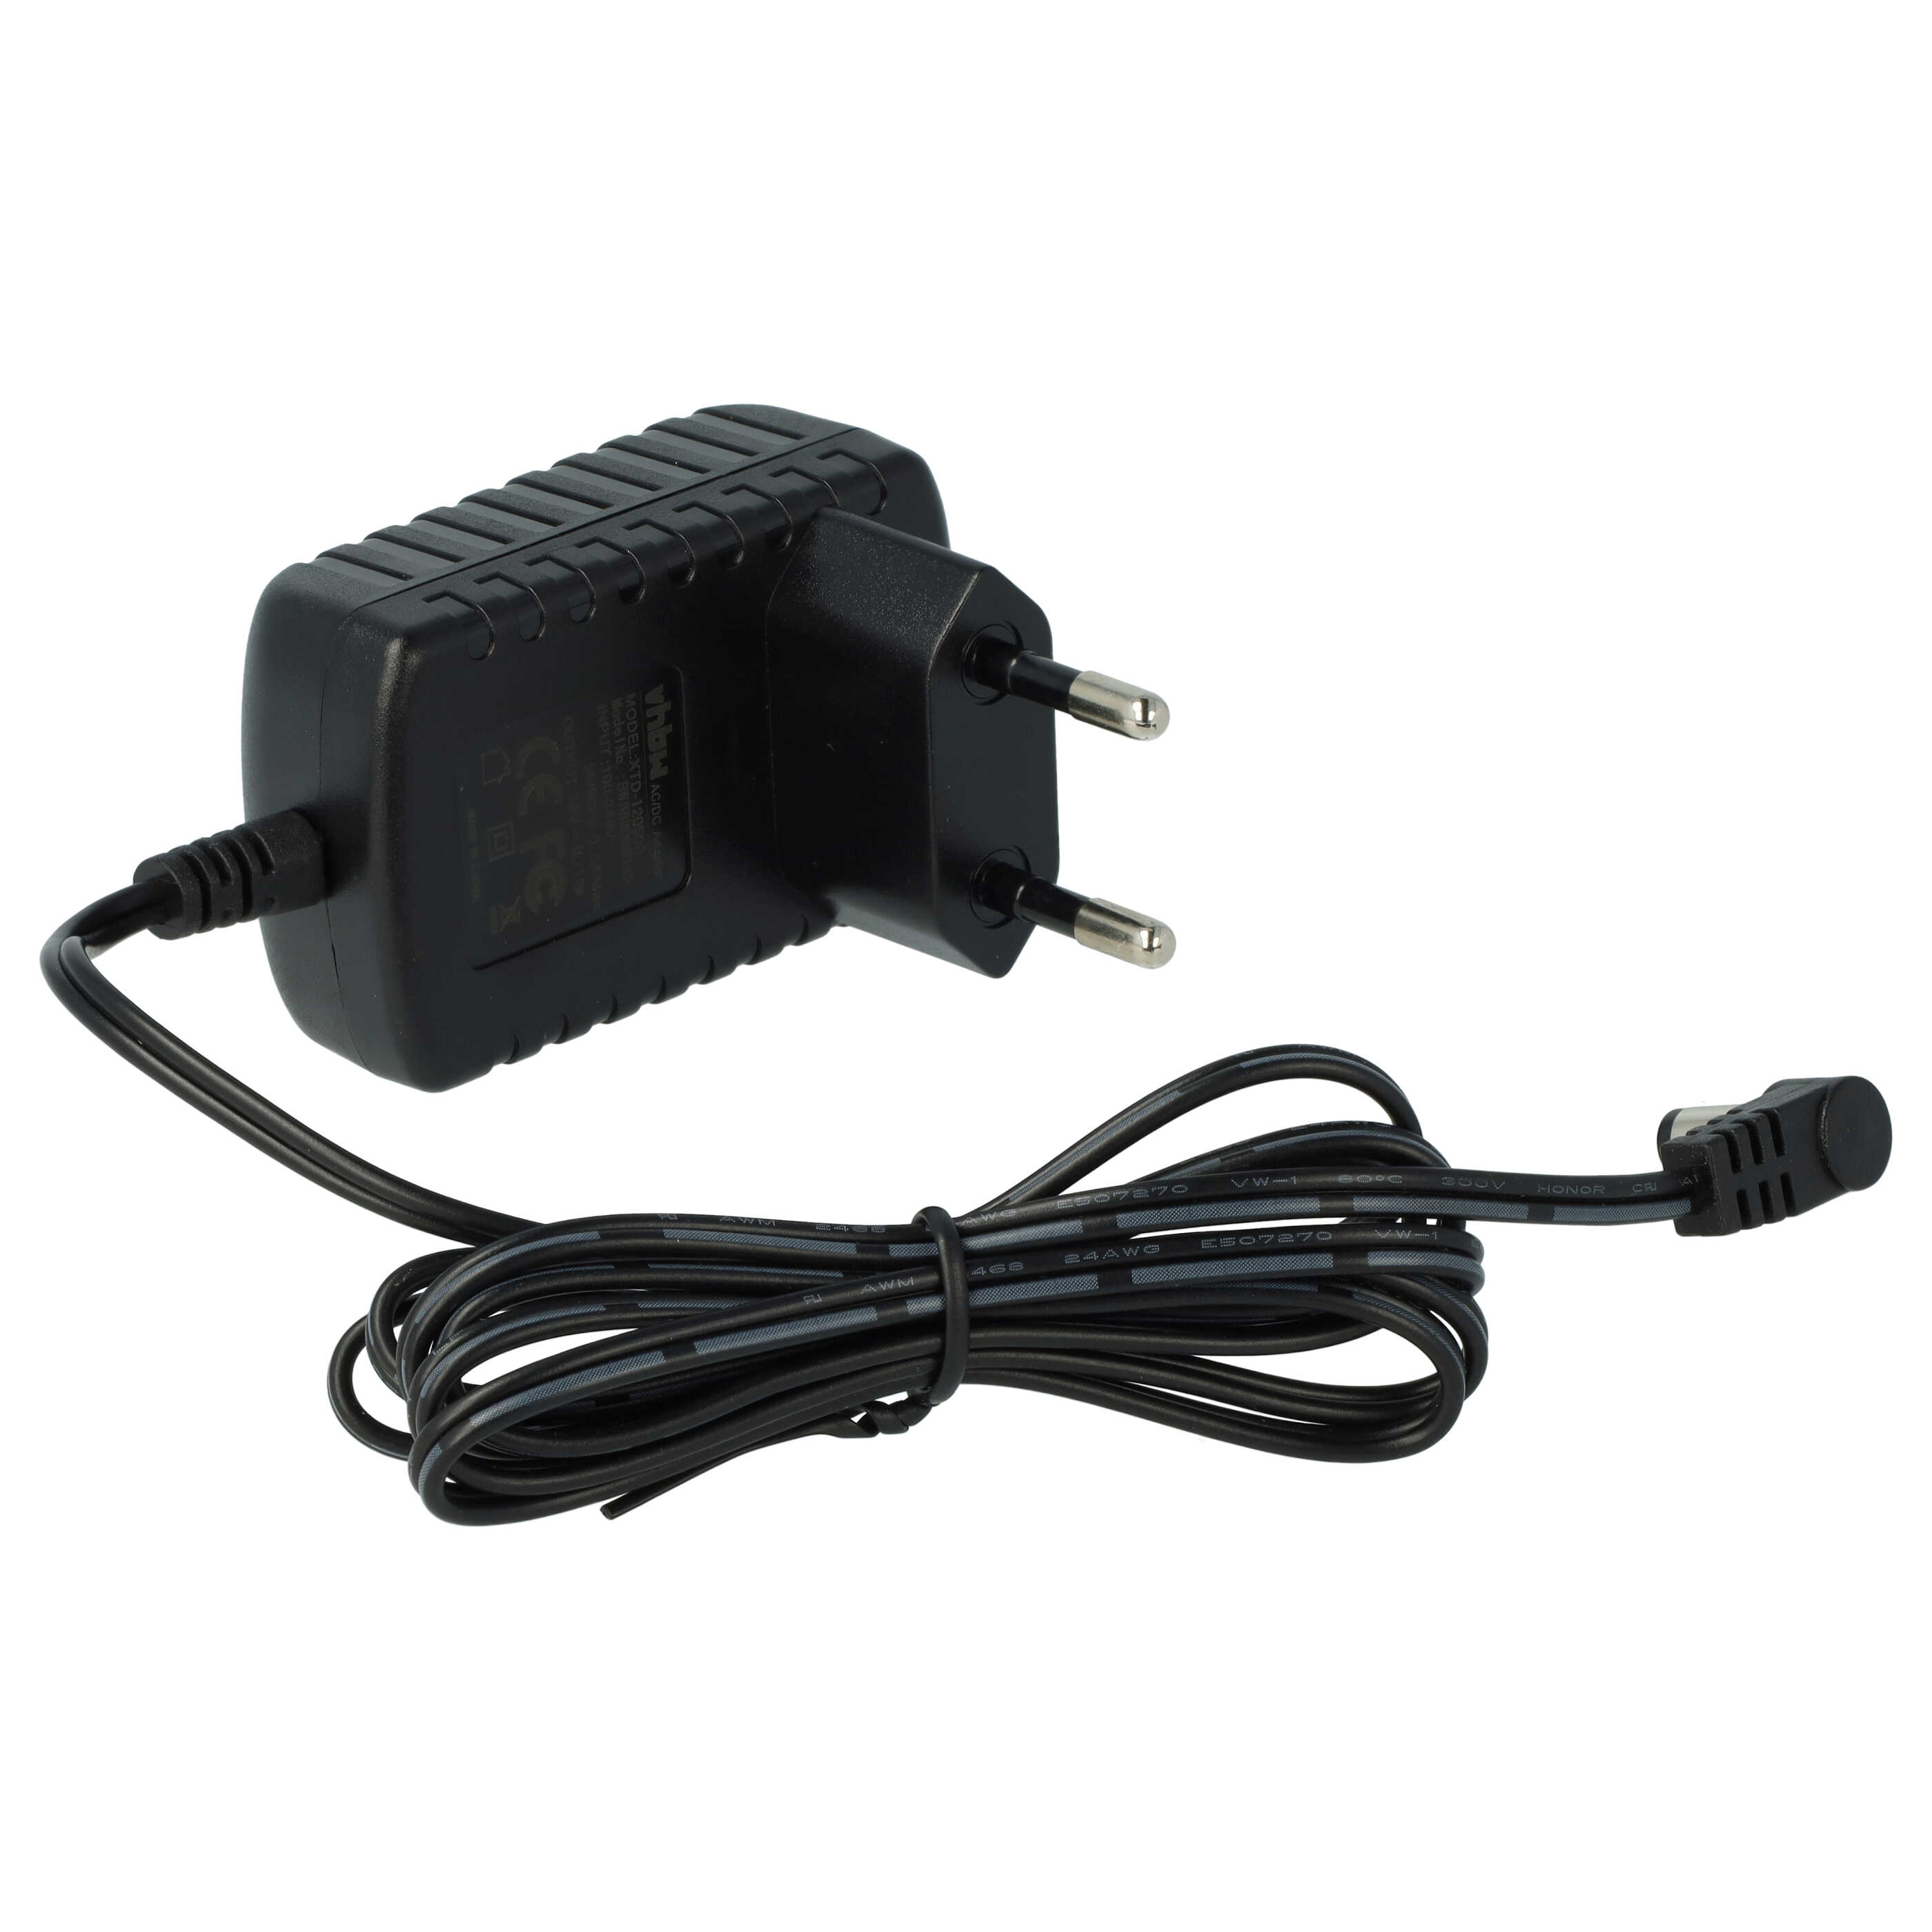 Mains Power Adapter replaces Gigaset C39280-Z4-C706 for Gigaset Landline Telephone, Home Telephone - 120 cm